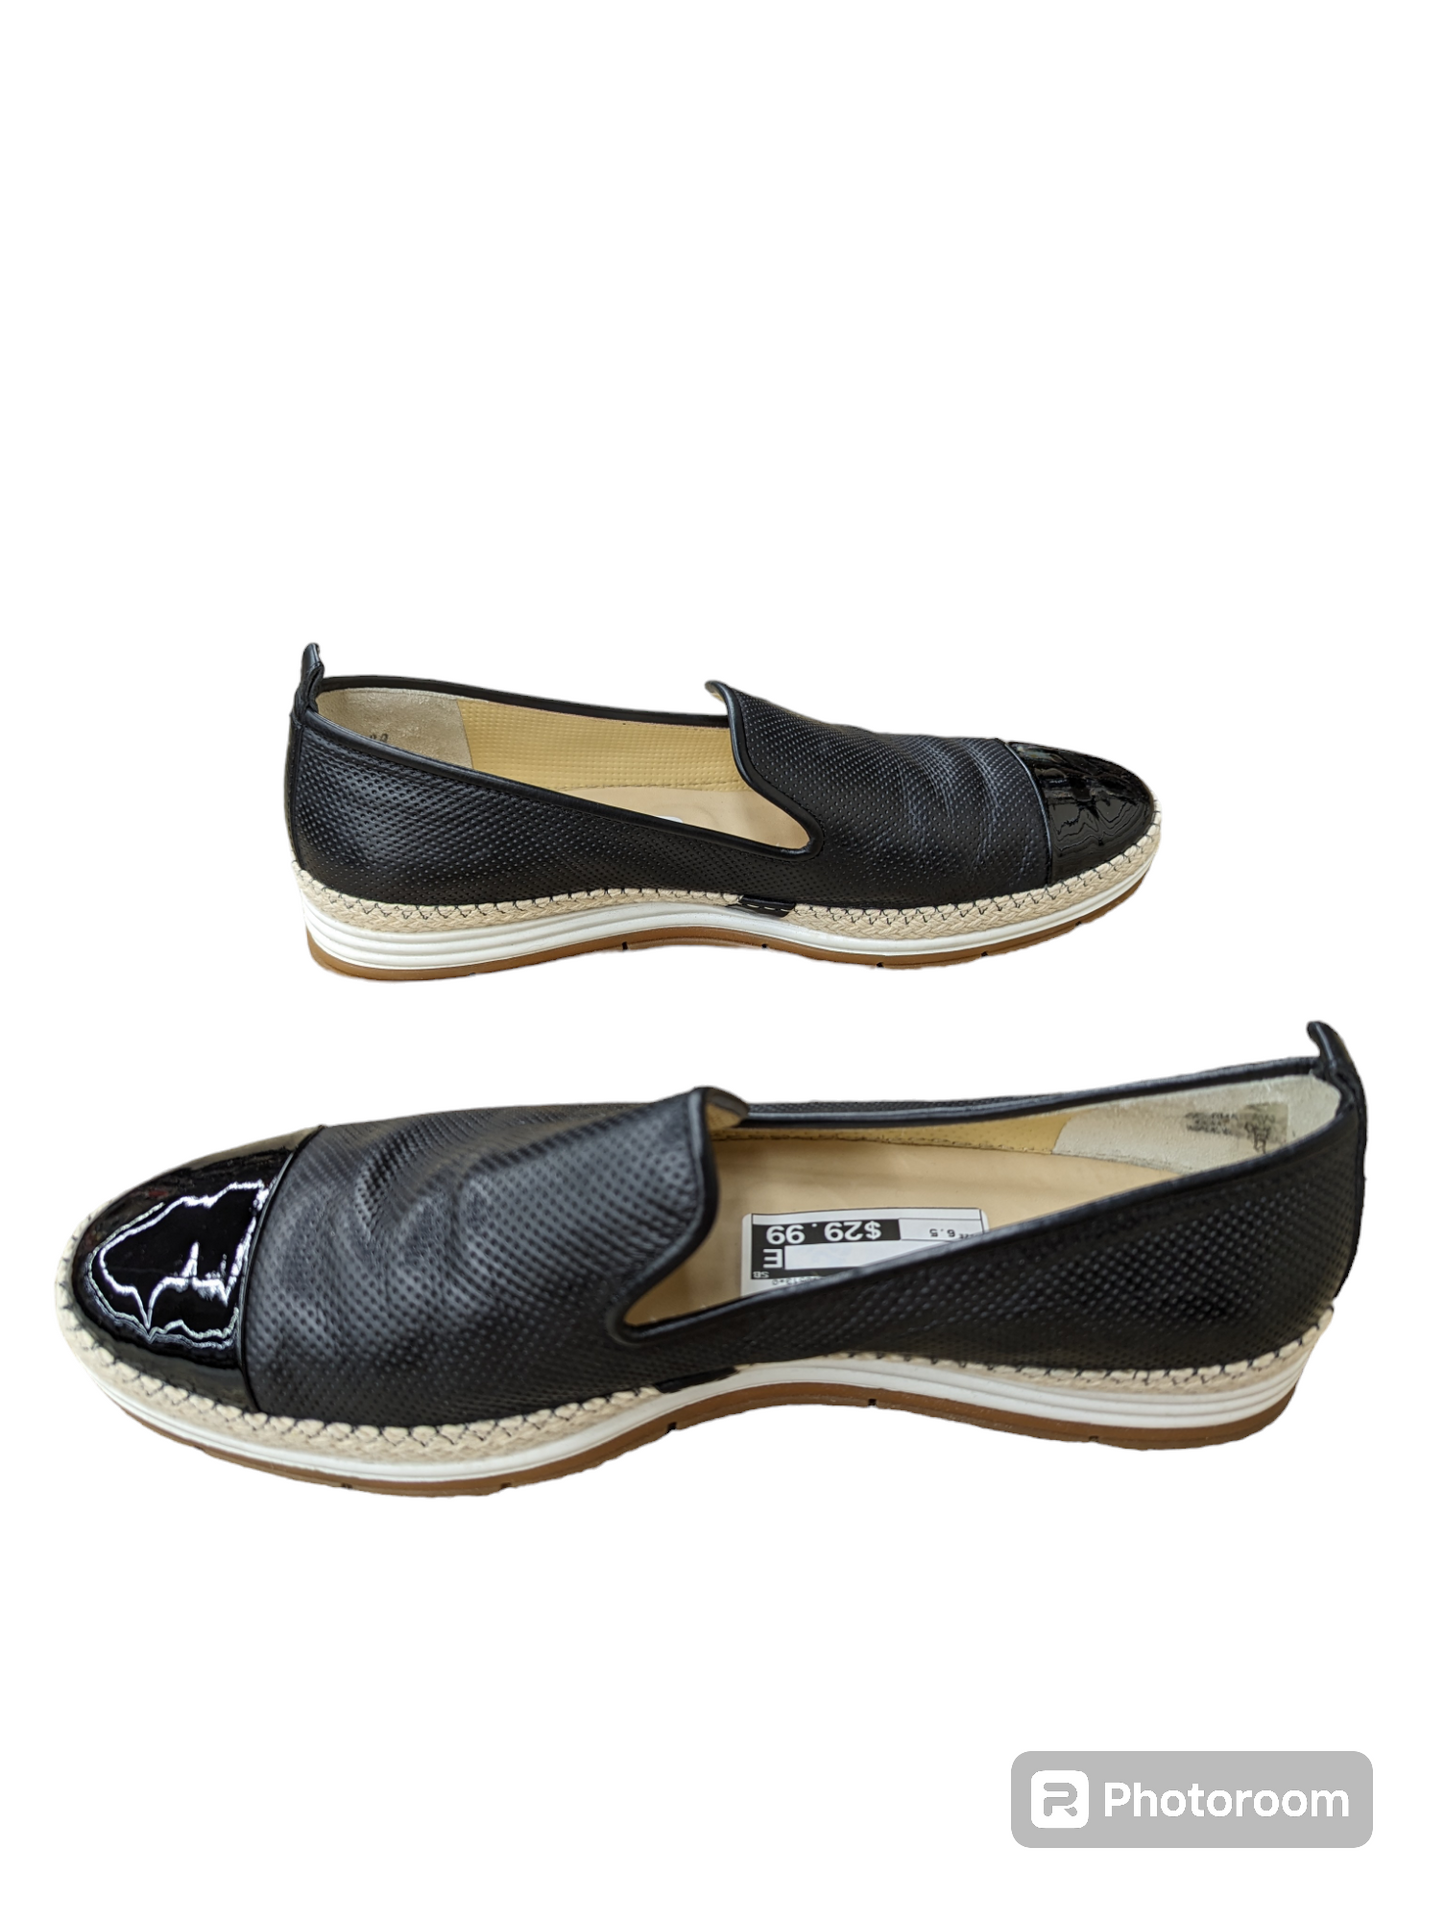 Shoes Flats By Paul Green  Size: 6.5